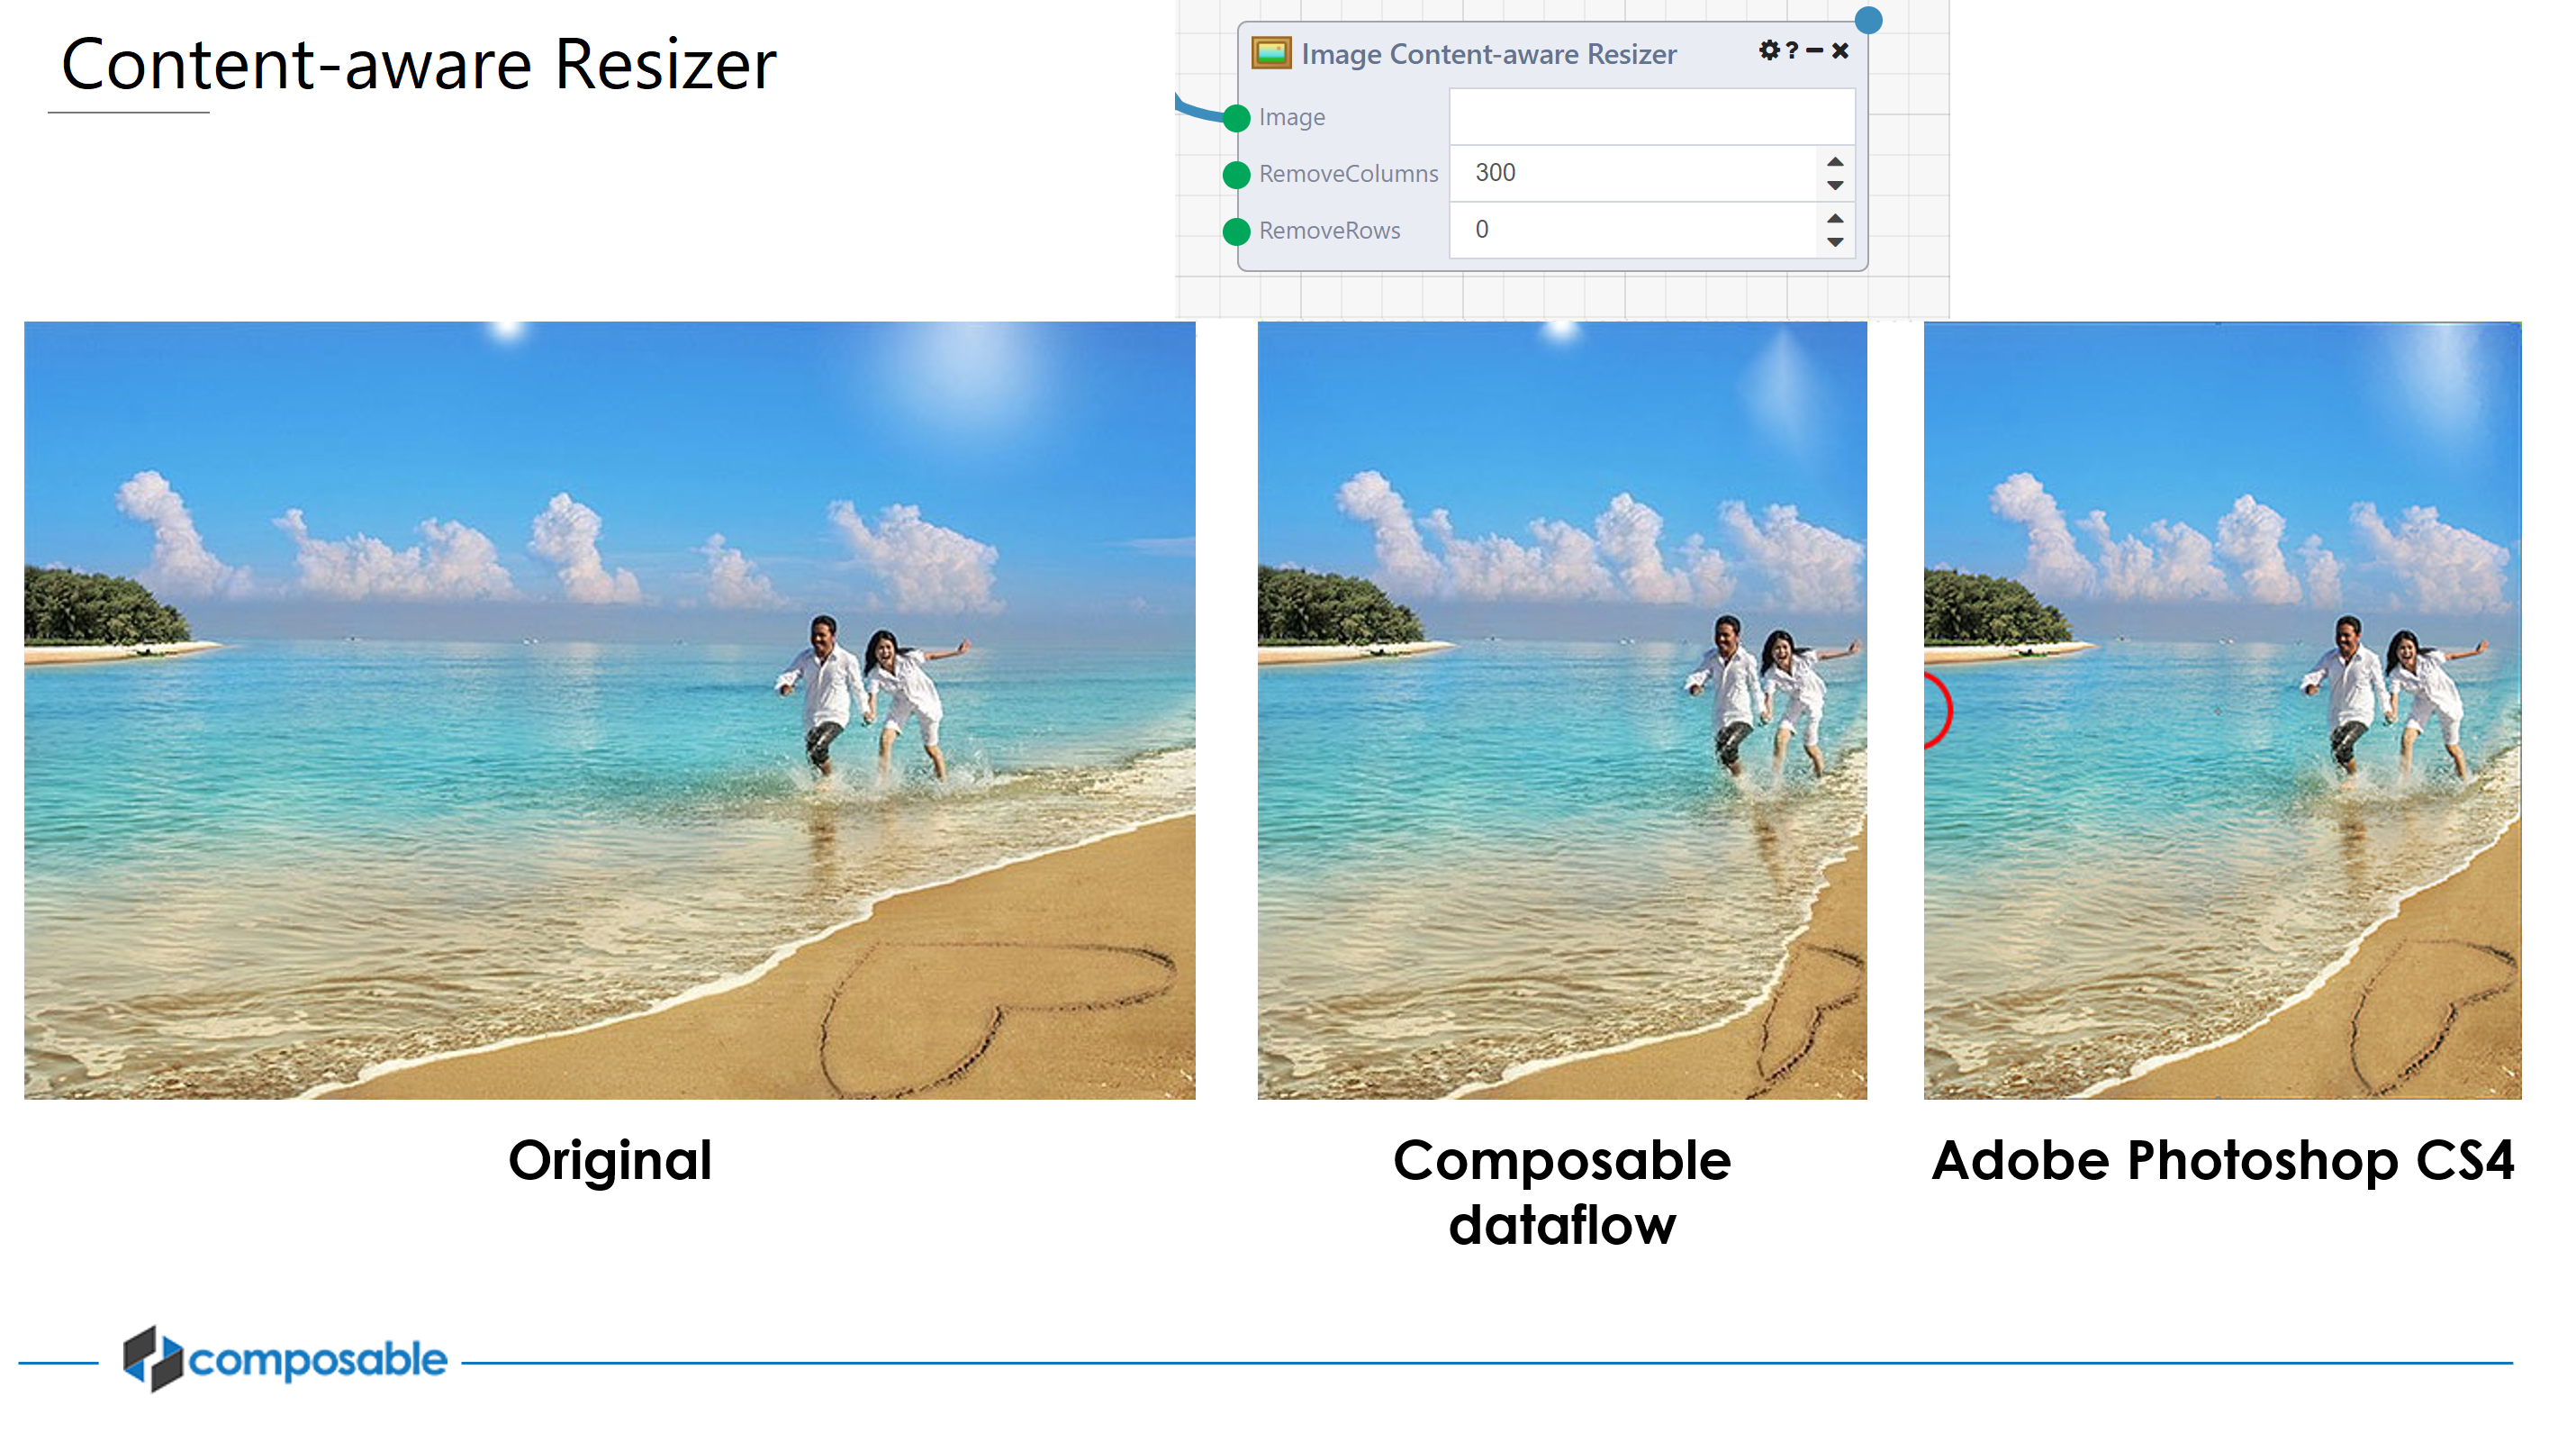 !Performance of Content-aware Resizer Module in Composable compared to Adobe Photoshop